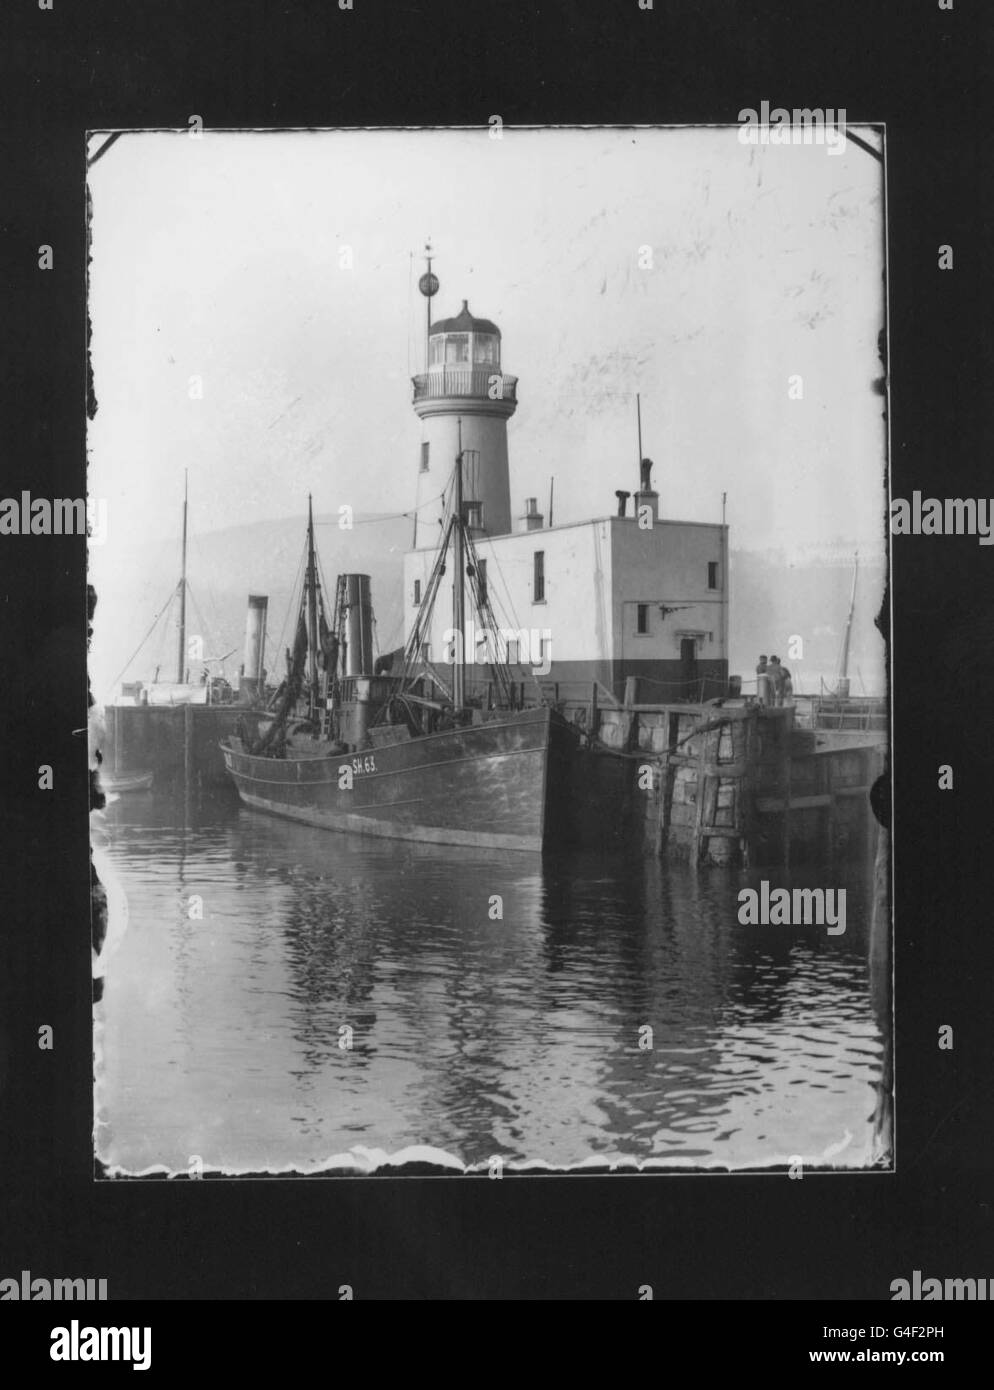 Williams Wells shot of the lighhouse in Scarborough. A treasure trove of Victorian photography, hidden for nearly 100 years has been discovered in a garage in Grimsby. The collection of high quality glass negatives and magic lantern slides, which will be sold with the cameras next week, were shot by Yorkshireman William Wells between 1899 and 1901. PA Photos. See PA story SOCIAL Photos Stock Photo